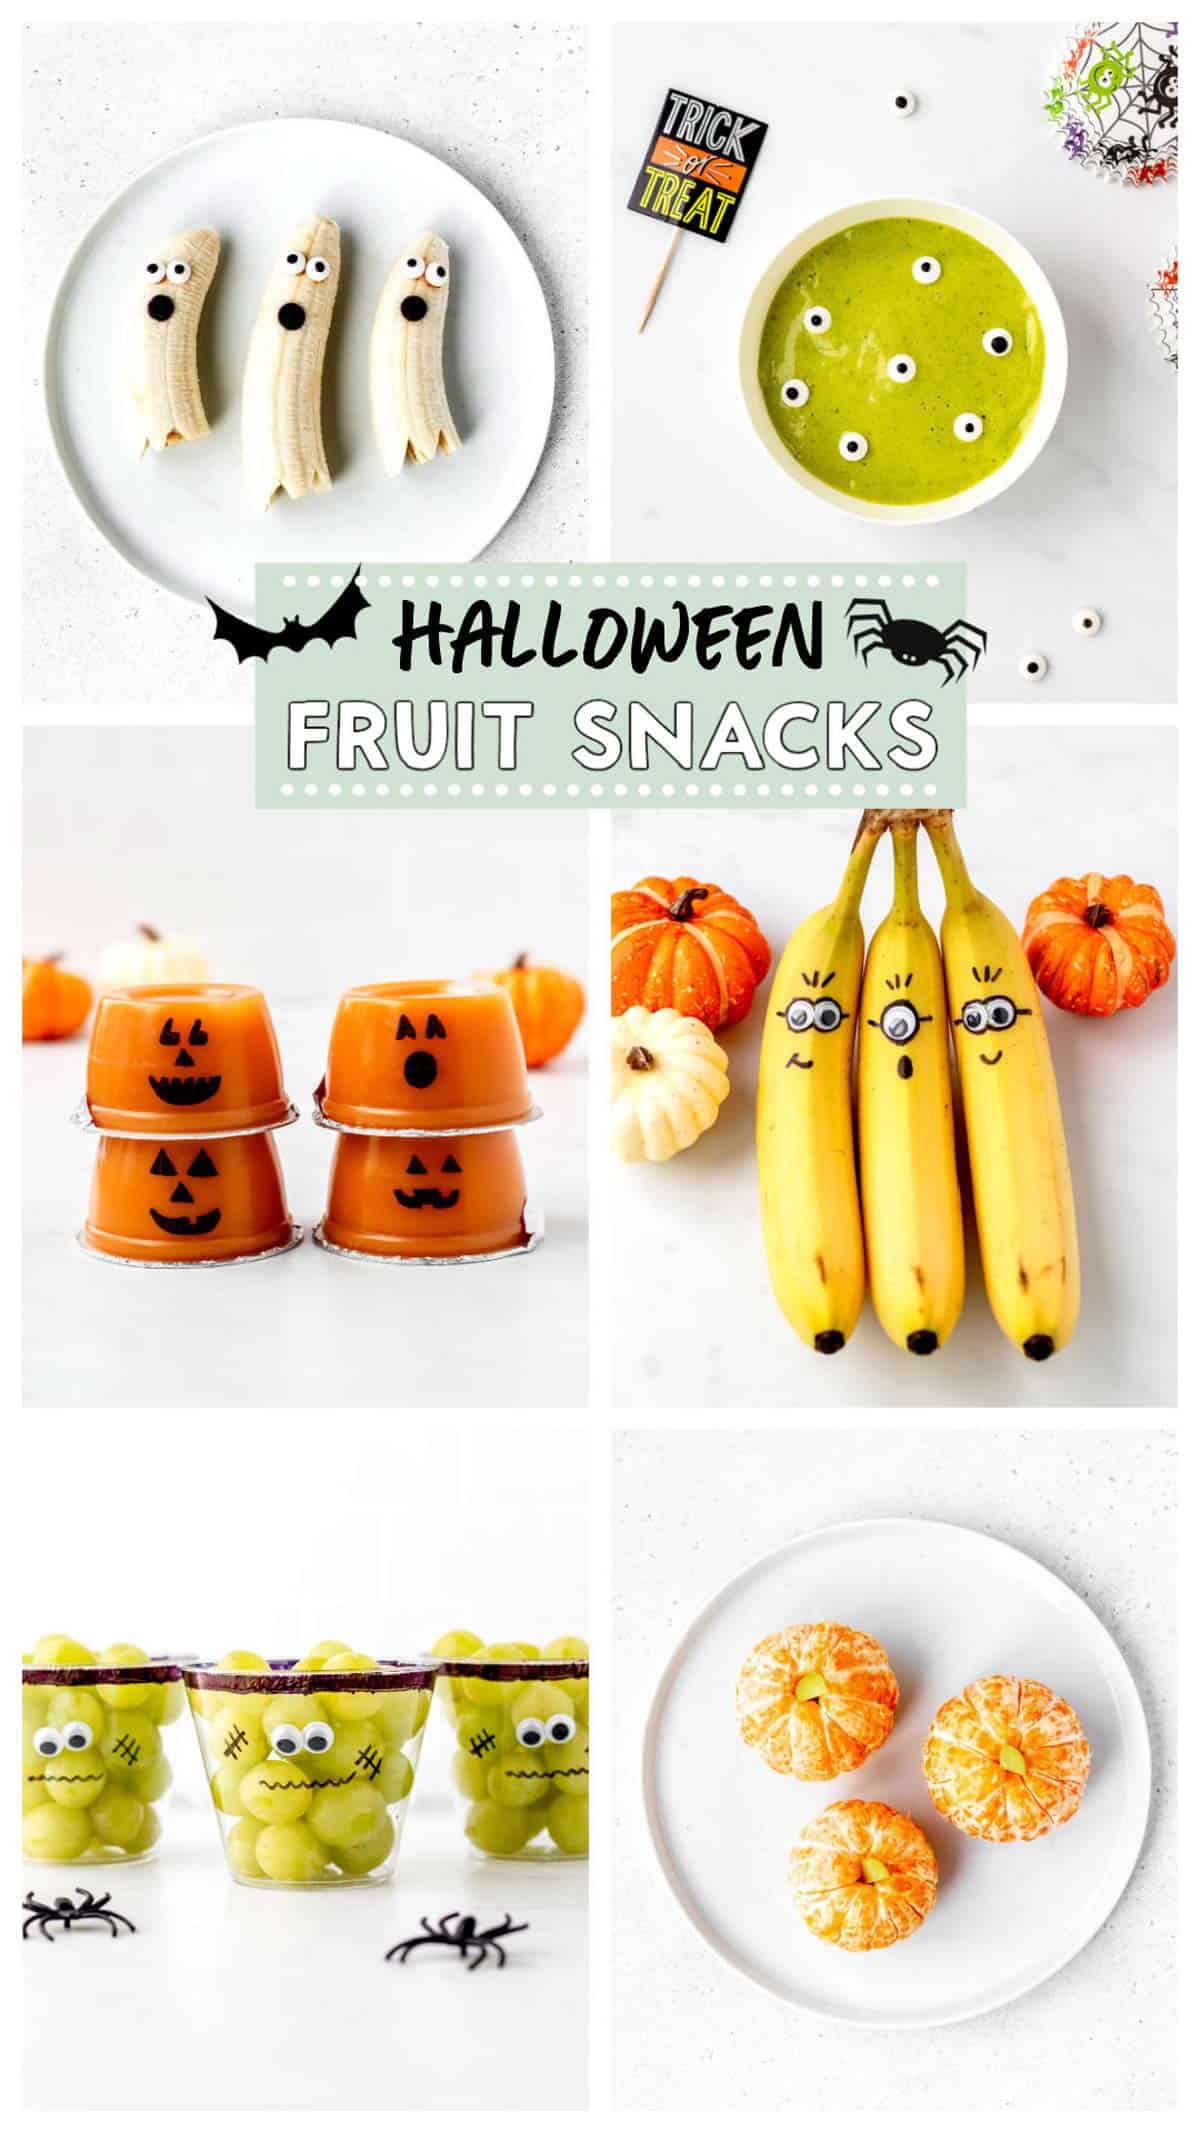 Six healthy fruit halloween snacks in a collage.